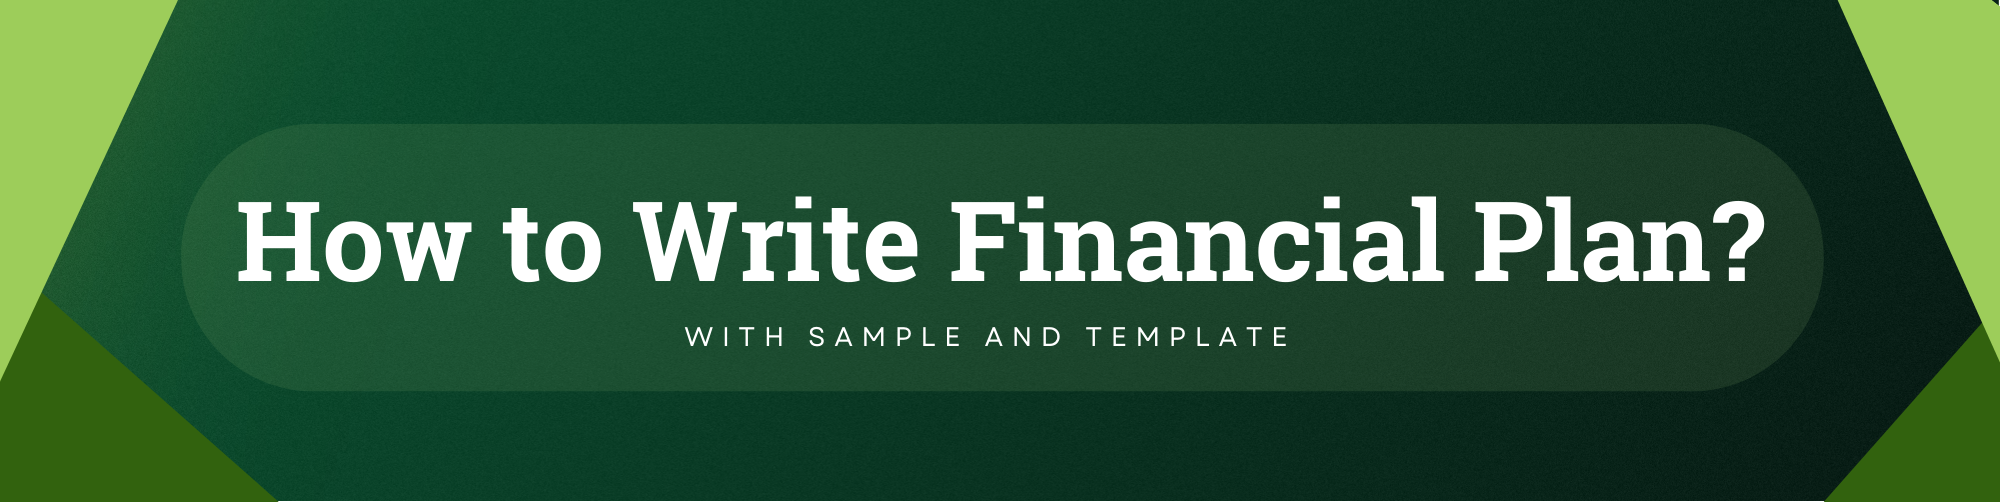 How to write Financial Plan with Sample and Template Banner 7 -diarynigracia